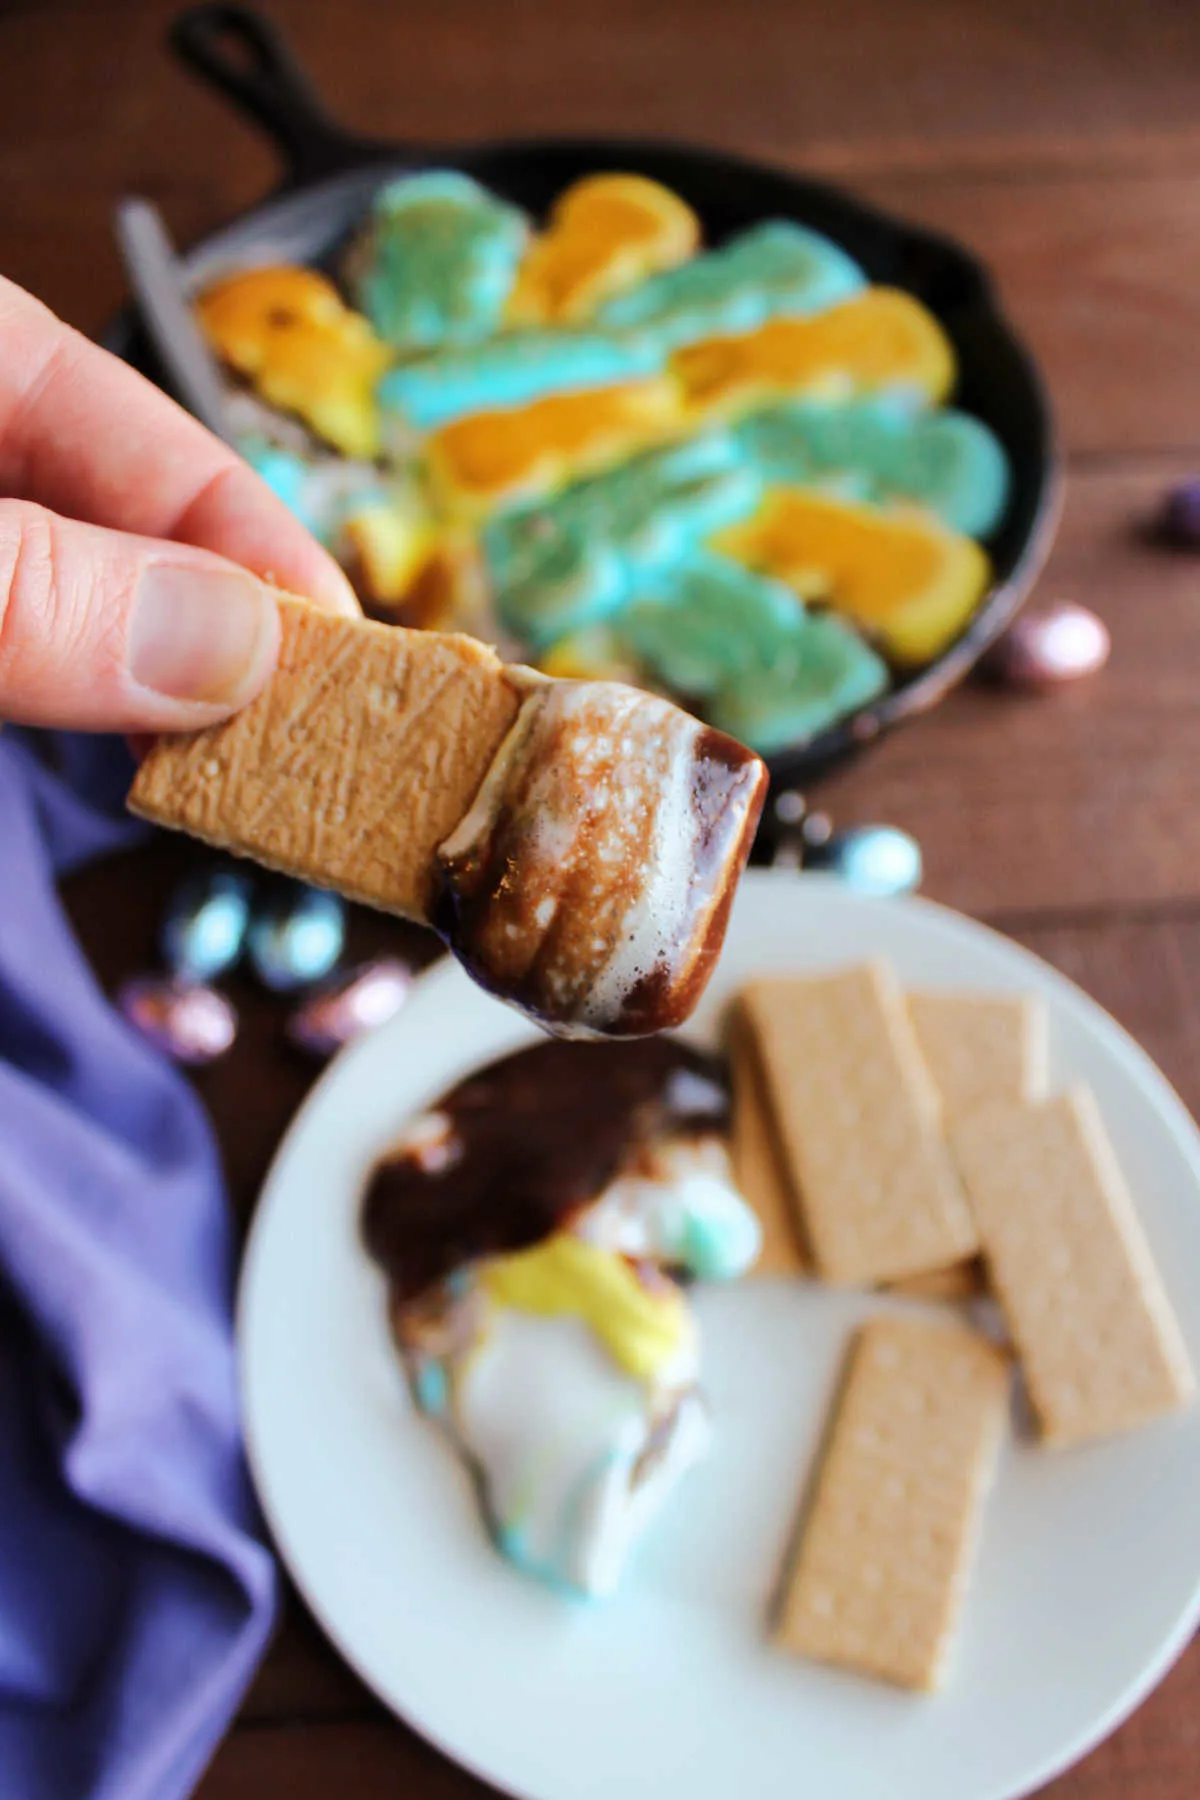 Graham cracker dipped in peeps smore dip showing gooey marshmallow and melted chocolate.